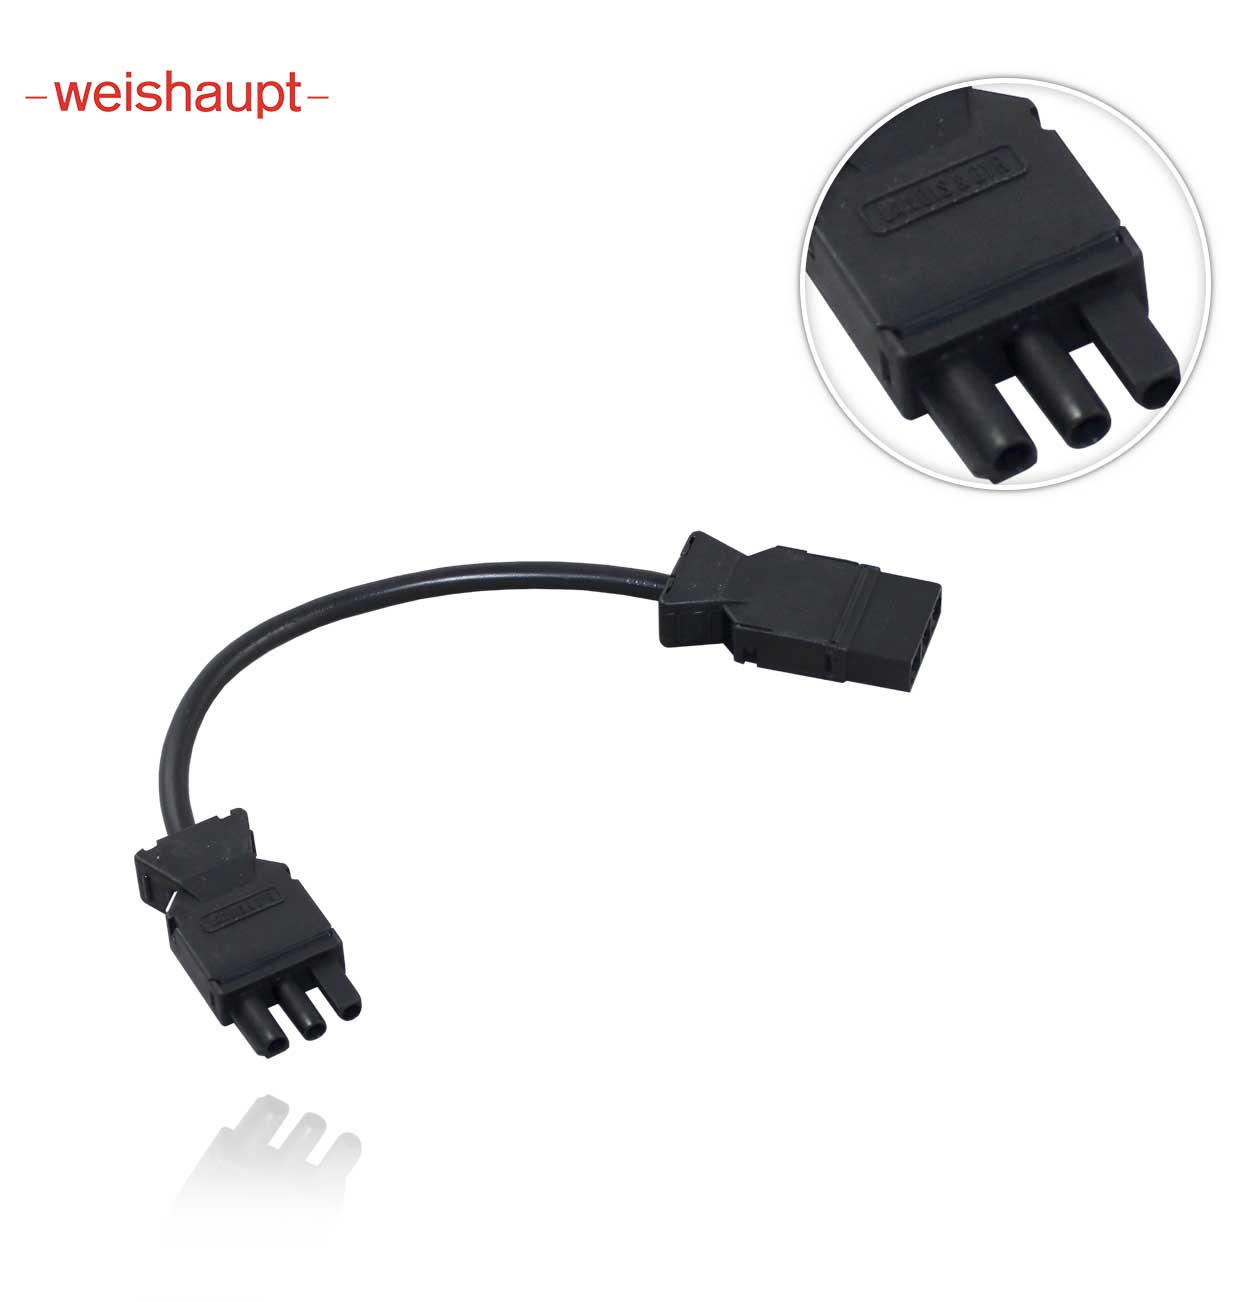 WEISHAUPT No. 4 IGNITION DEVICE EXTENSION CABLE